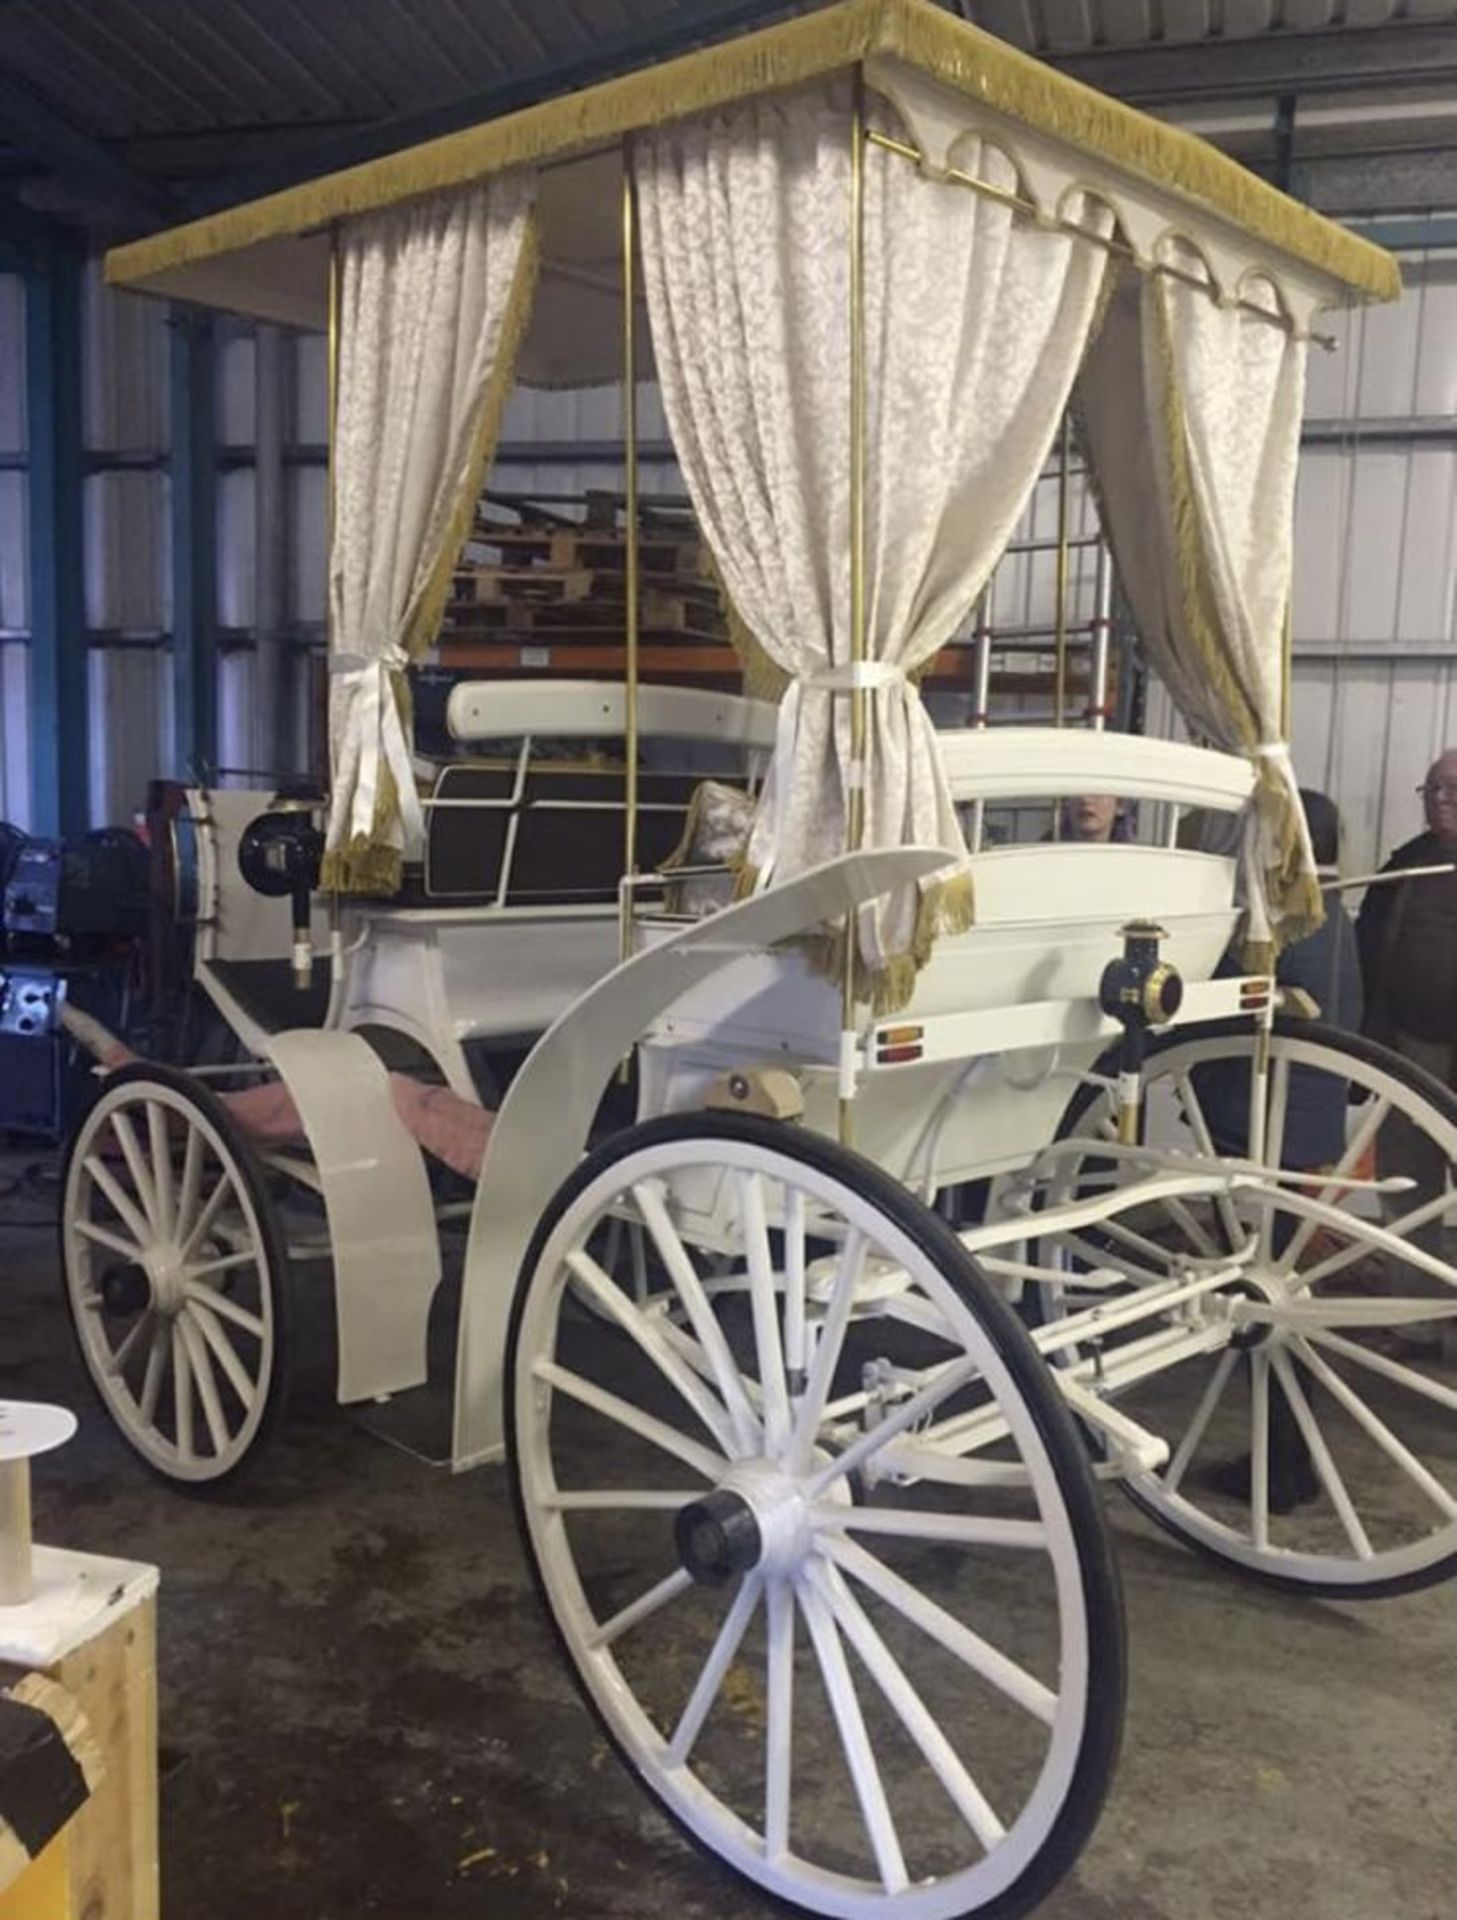 WEDDING CARRIAGE VINTAGE HORSE DRAWN 1870S VICTORIA PHANTOM CARRIAGE.LOCATION NORTH YORKSHIRE. - Image 2 of 4